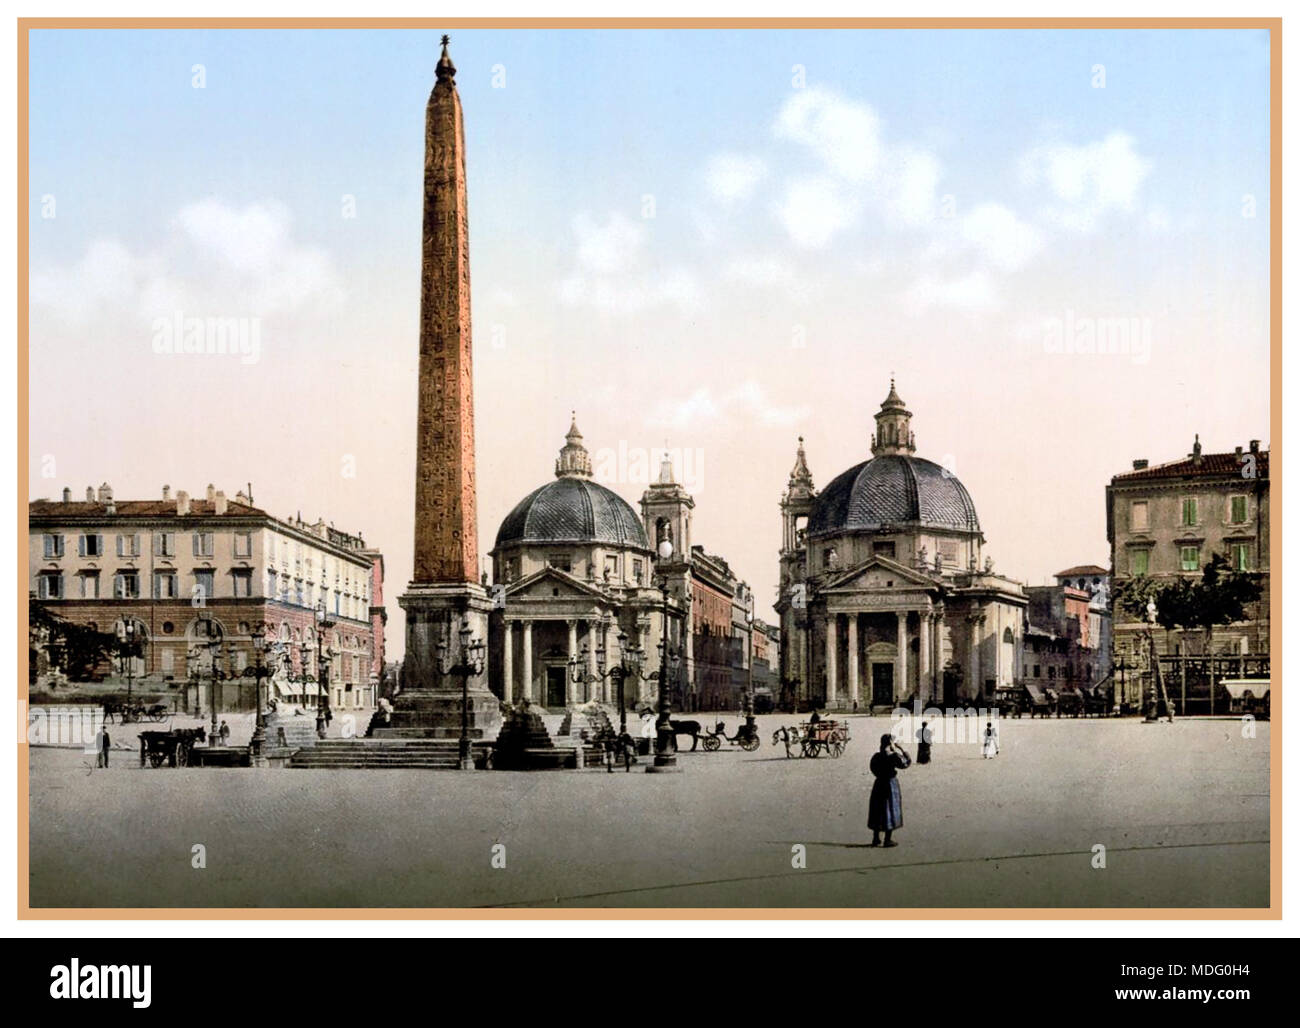 ROM PIAZZA DEL POPOLO Vintage Historic Old Photo image Piazza del Popolo, Rome, Italy, 1890-1900 Photochrom Photolithographie Chromolithographie Historic Vintage Victorian post coloring printing process Stockfoto